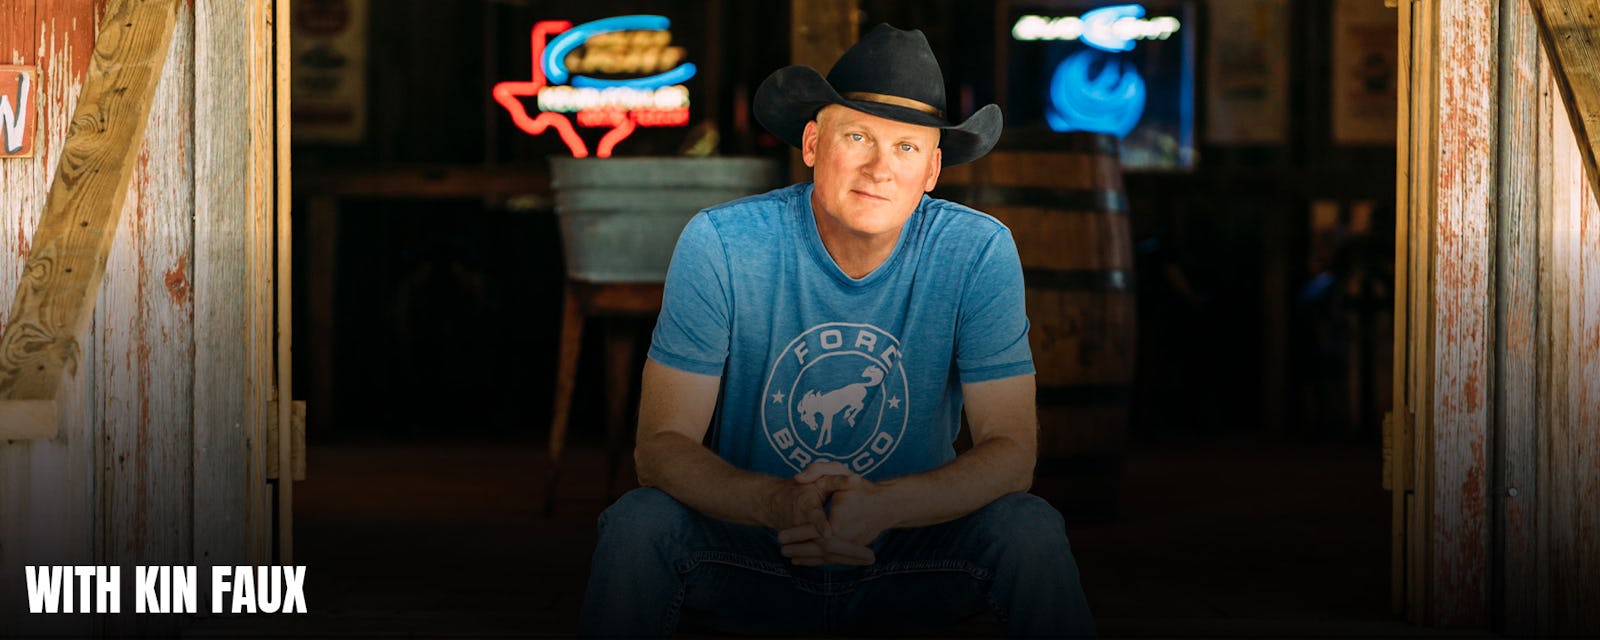 Tshirt- Beer Bait and Ammo – Kevin Fowler's General Store